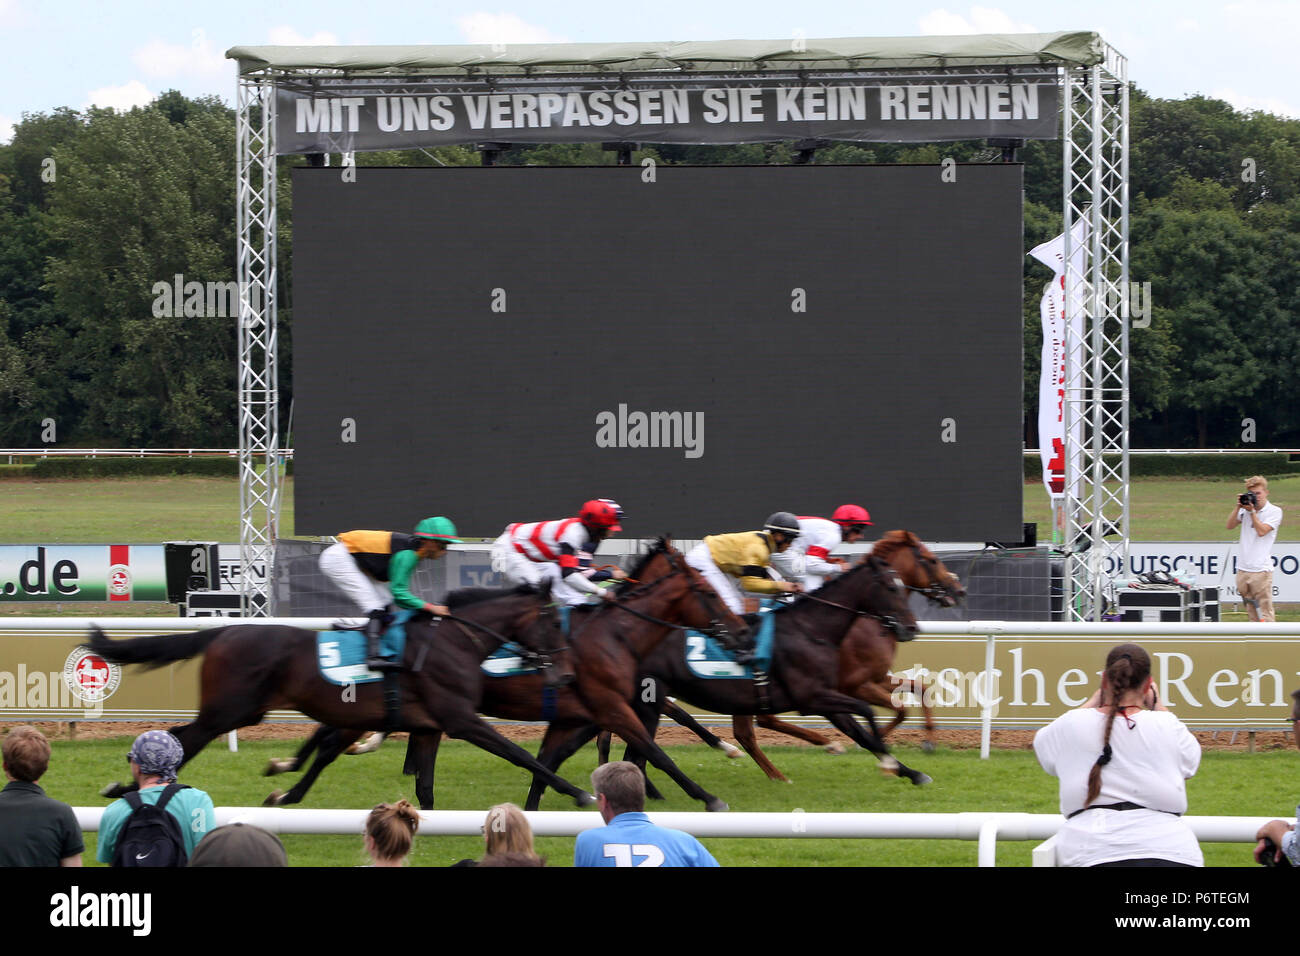 Hannover, black screen on the video screen during a gallop race Stock Photo